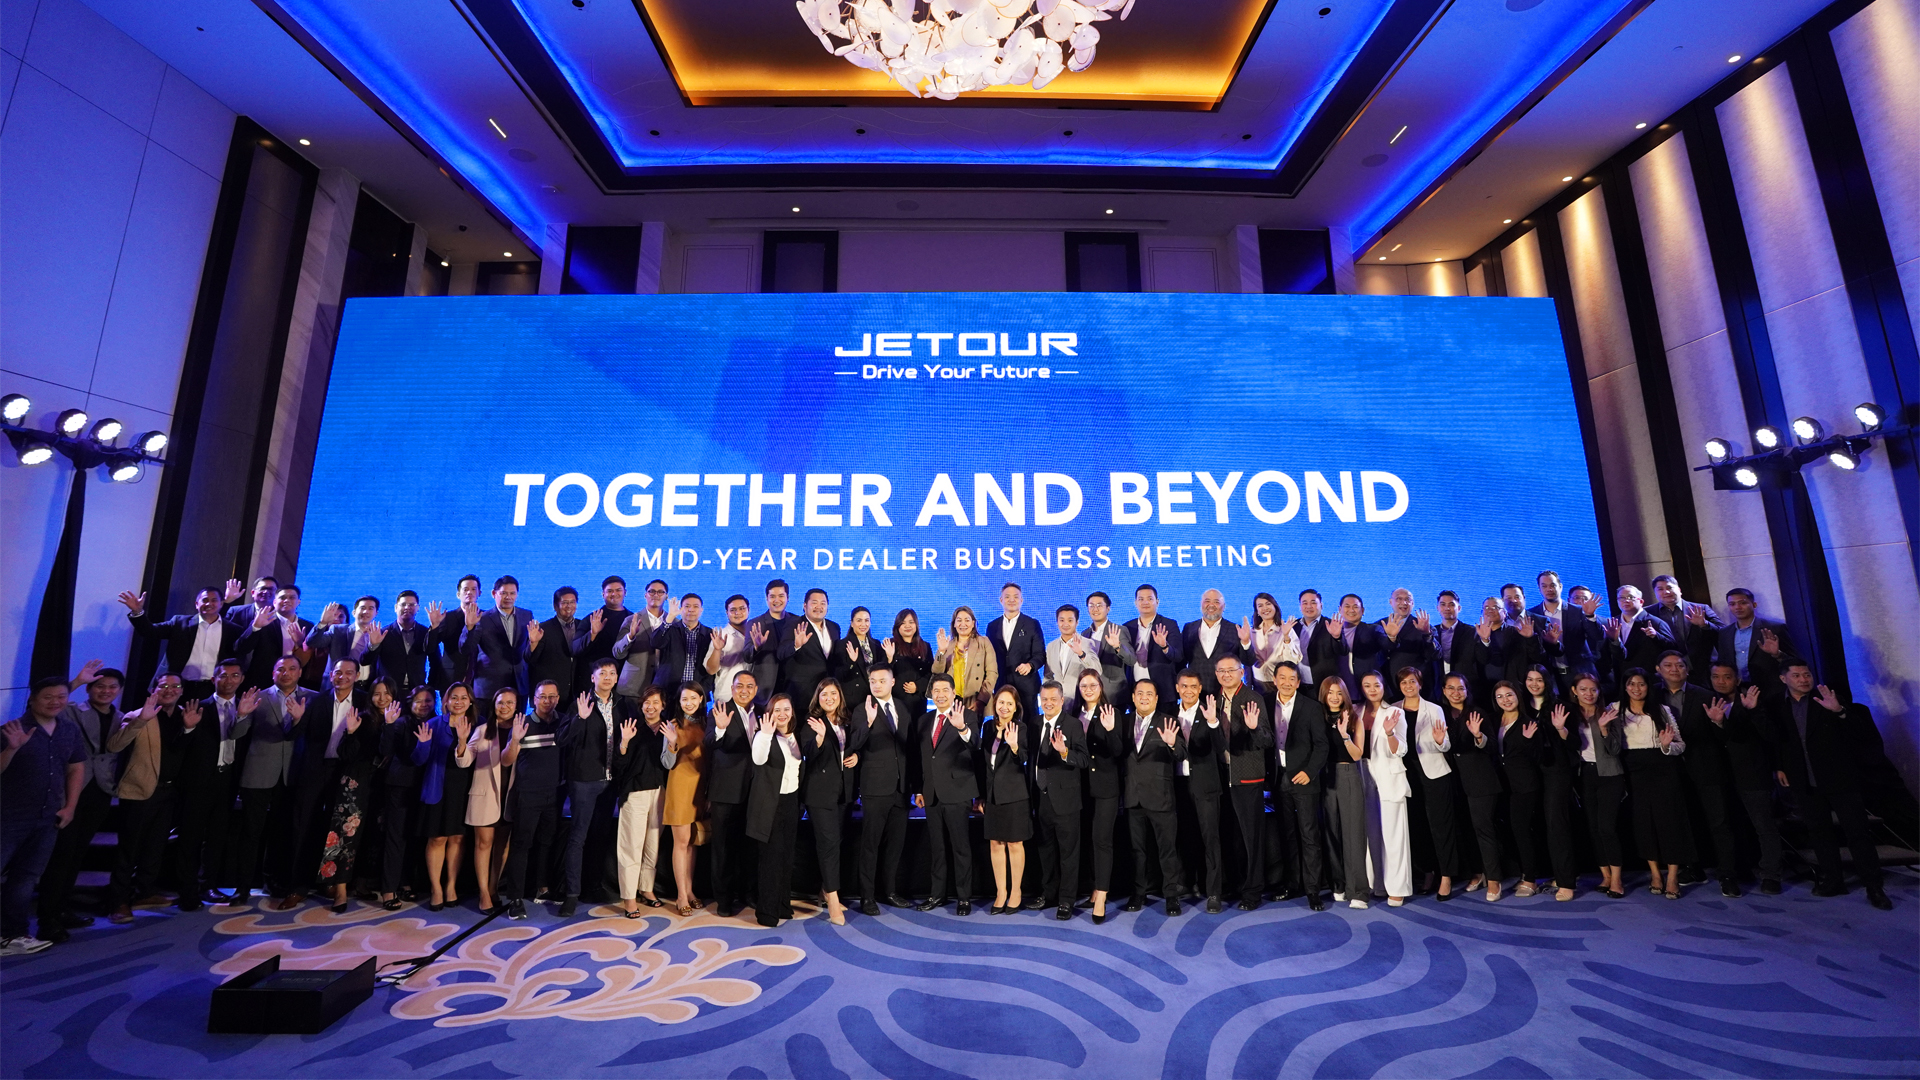 Buoyed by JETOUR’s worldwide successes, JAPI sets lofty targets in mid-year business conference